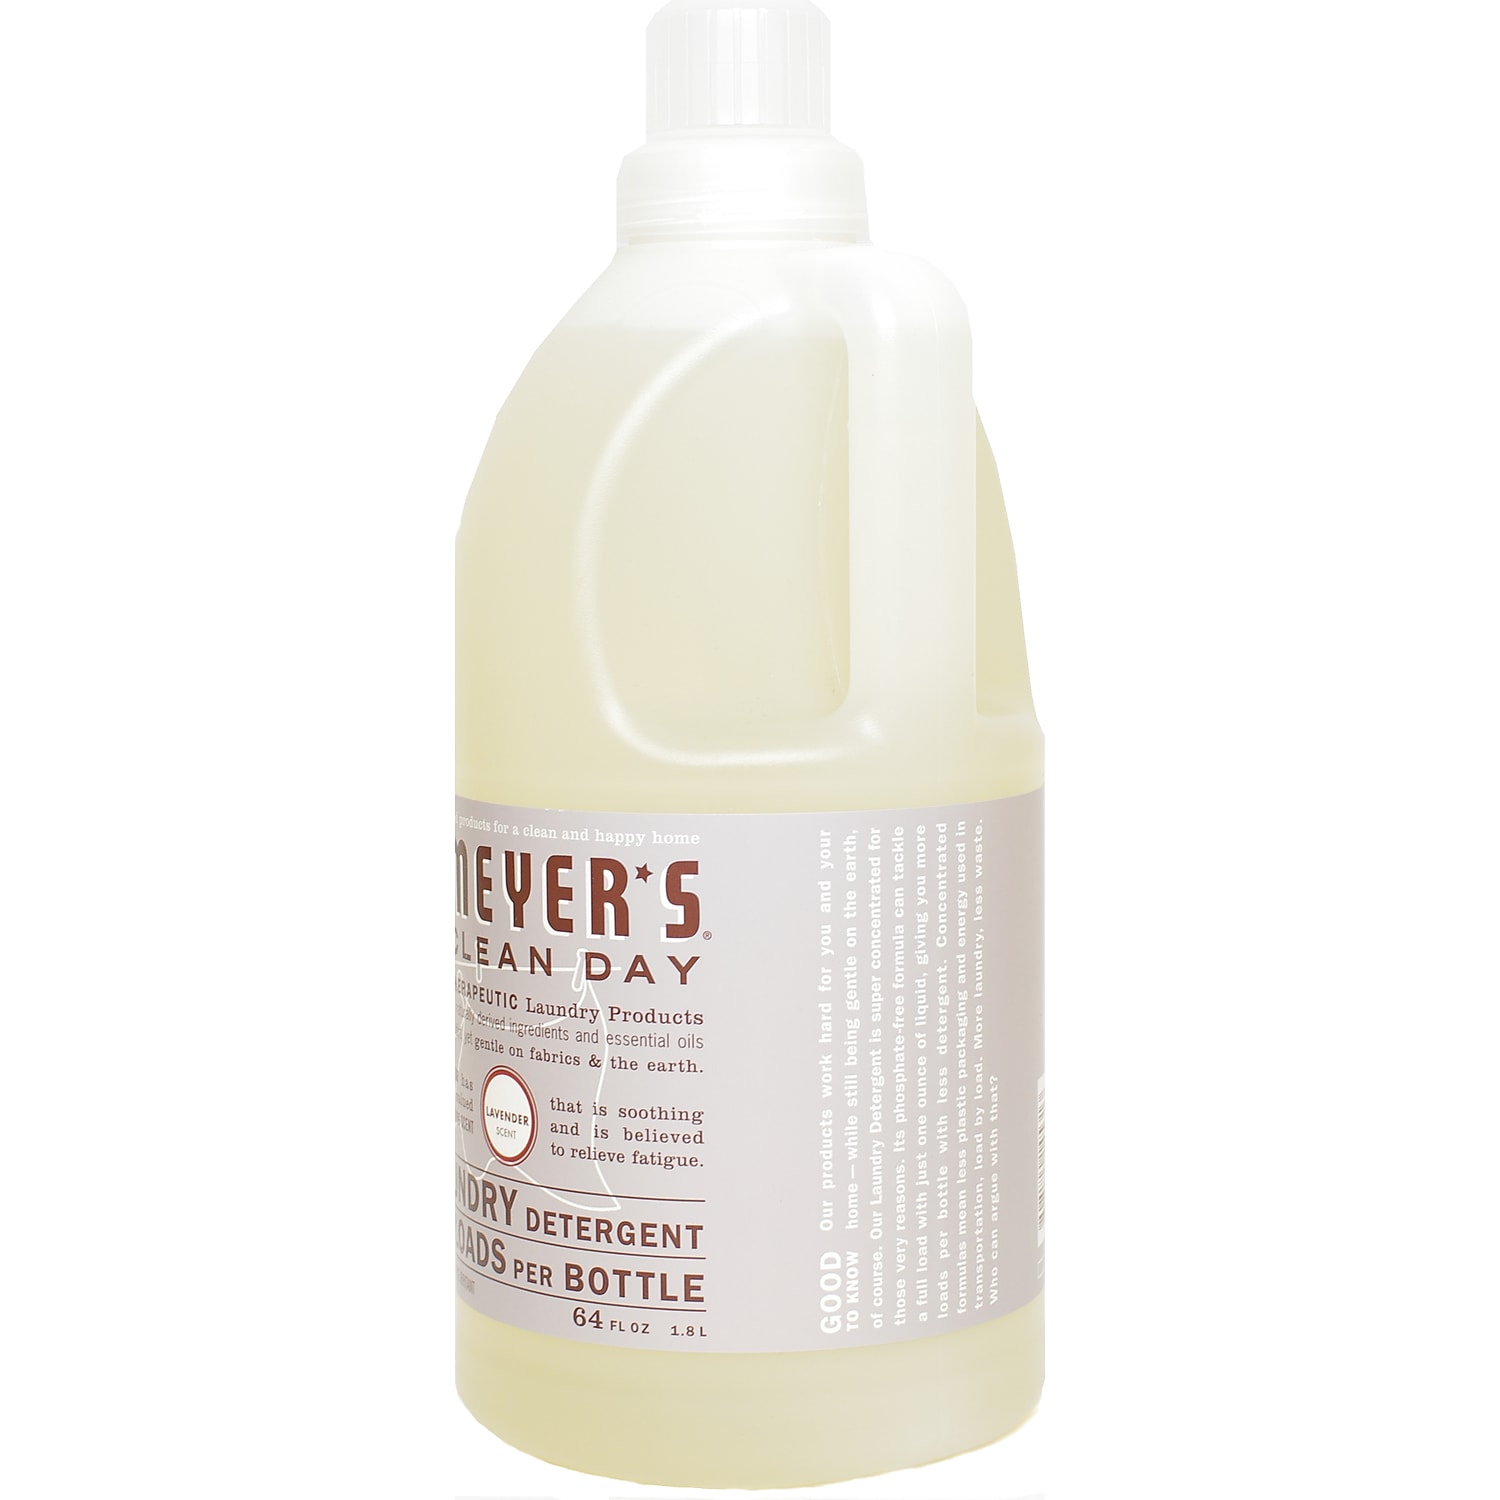 Mrs. Meyers Clean Day Laundry Detergent, Lavender, 64 fl oz - image 4 of 7